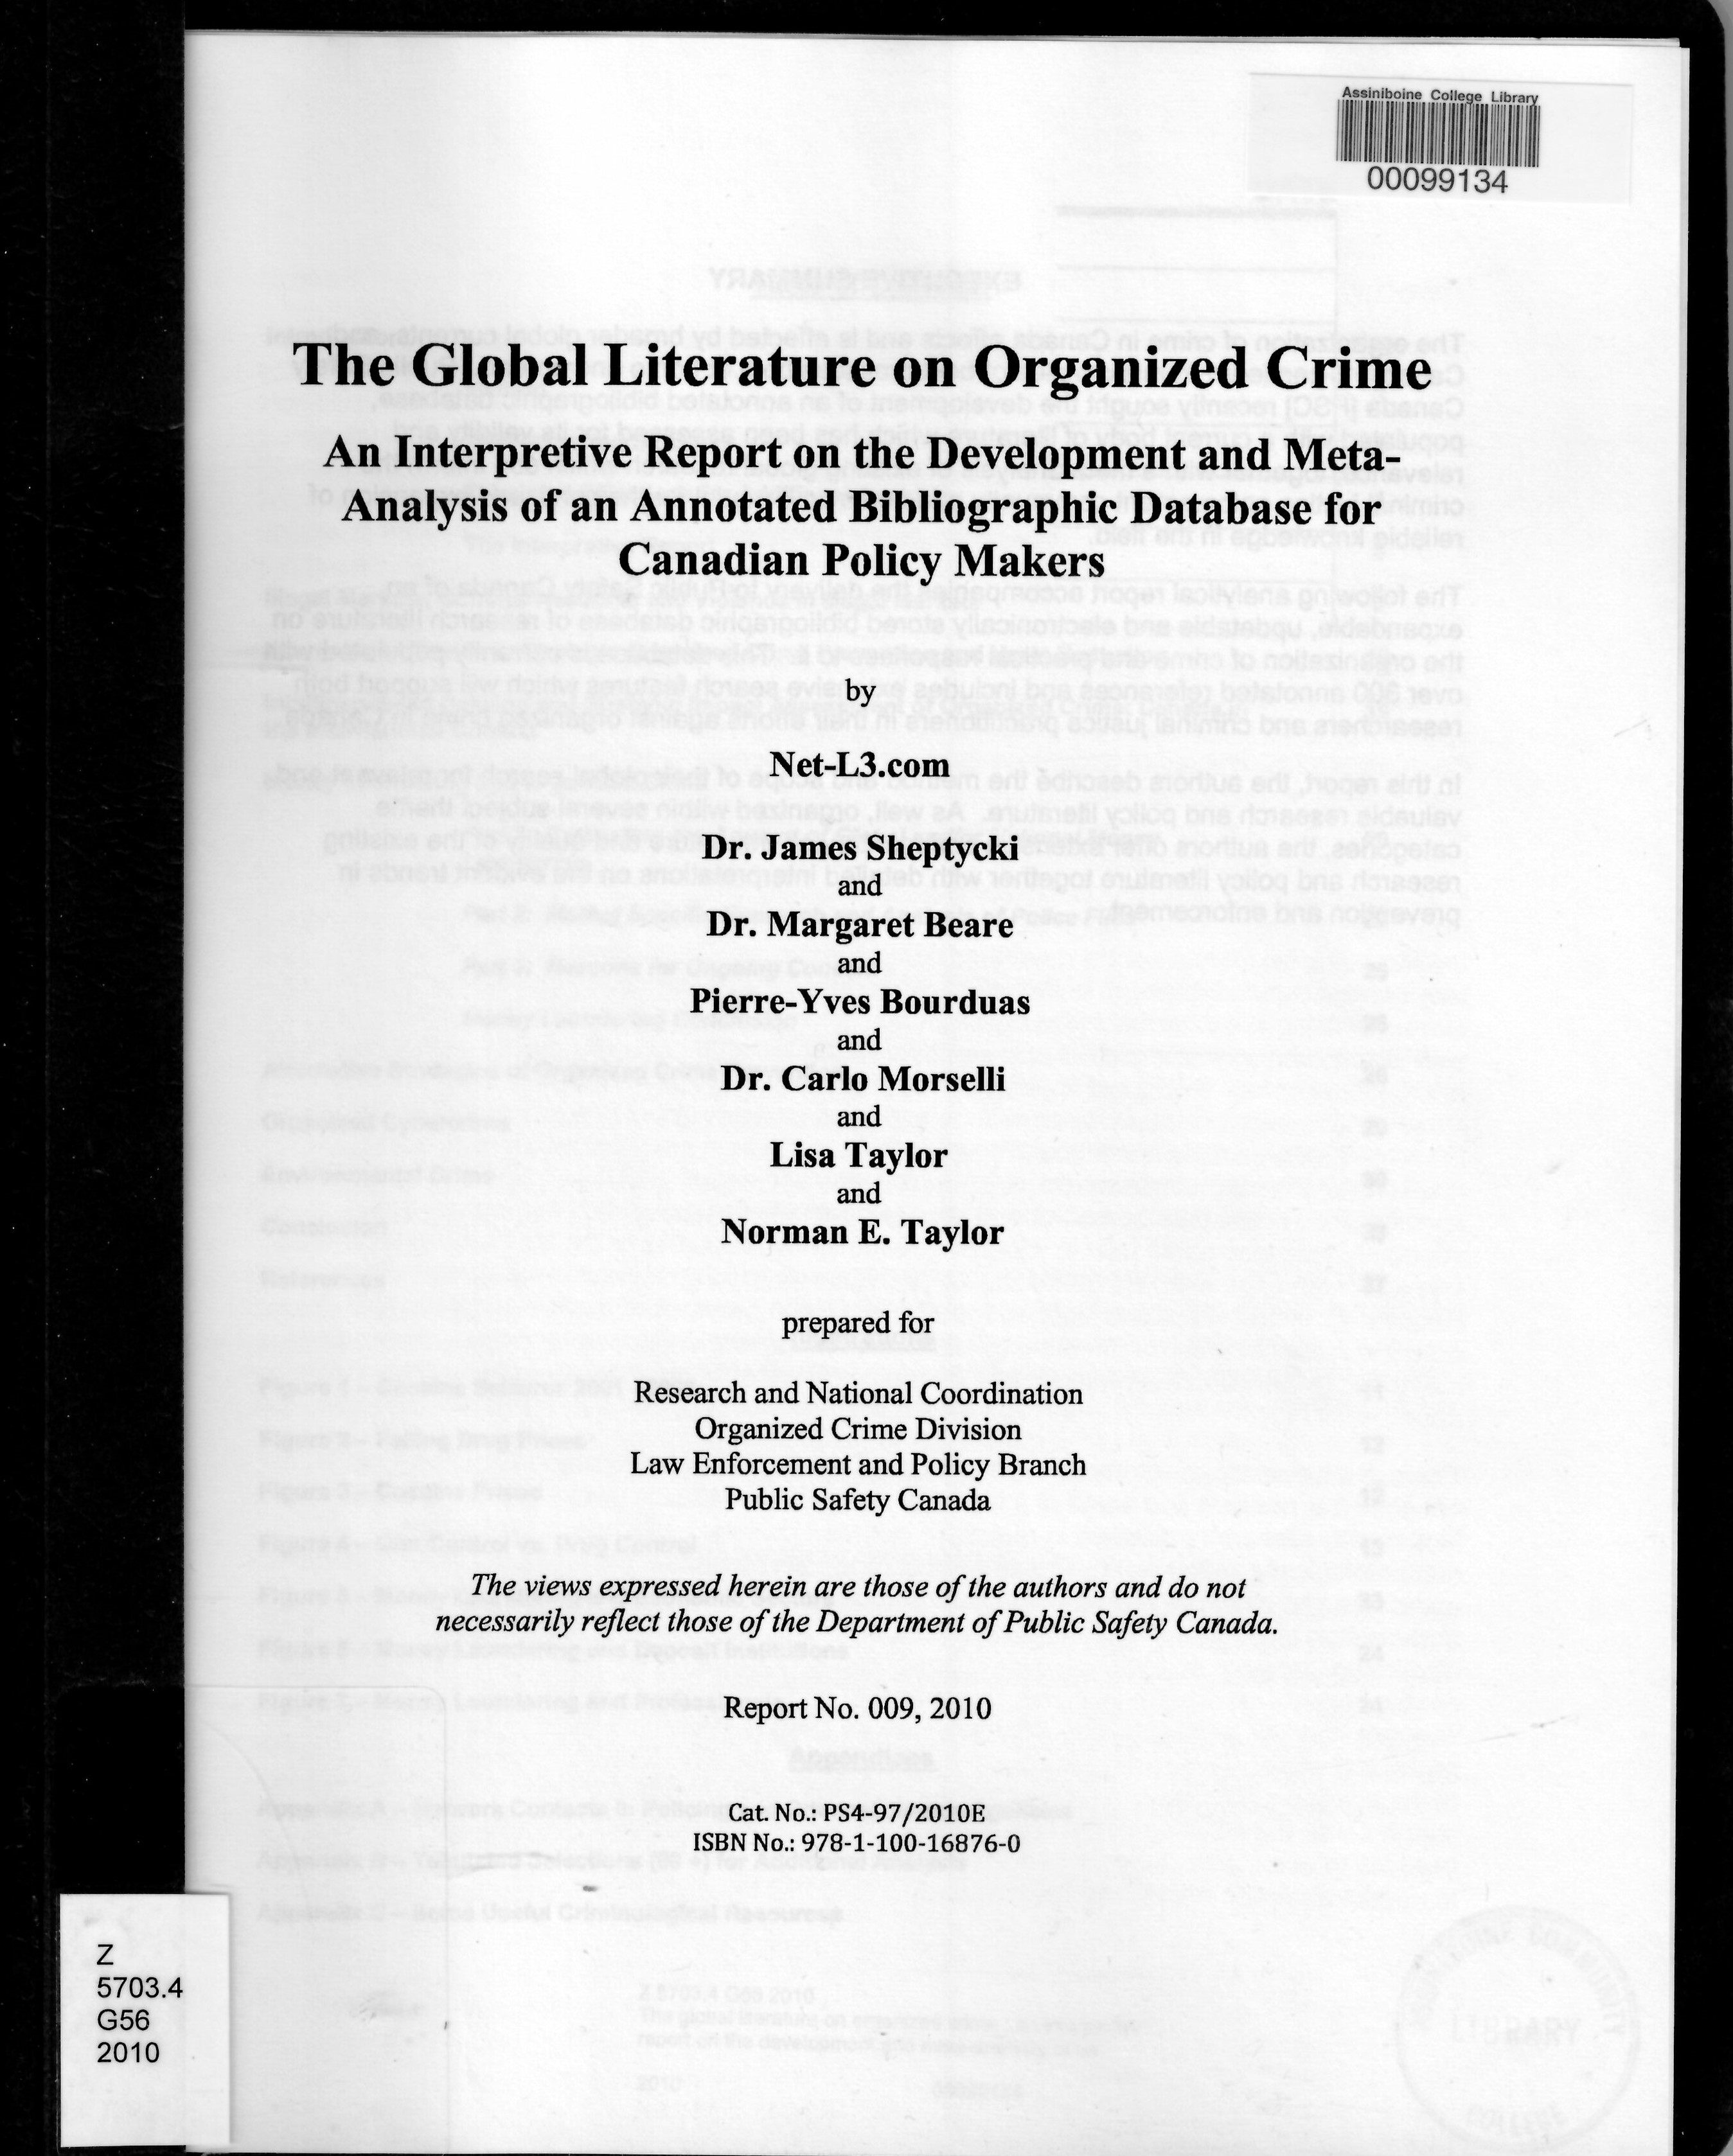 The global literature on organized crime : an interpretive report on the development and meta-analysis of an annotated bibliographic database for Canadian policy makers